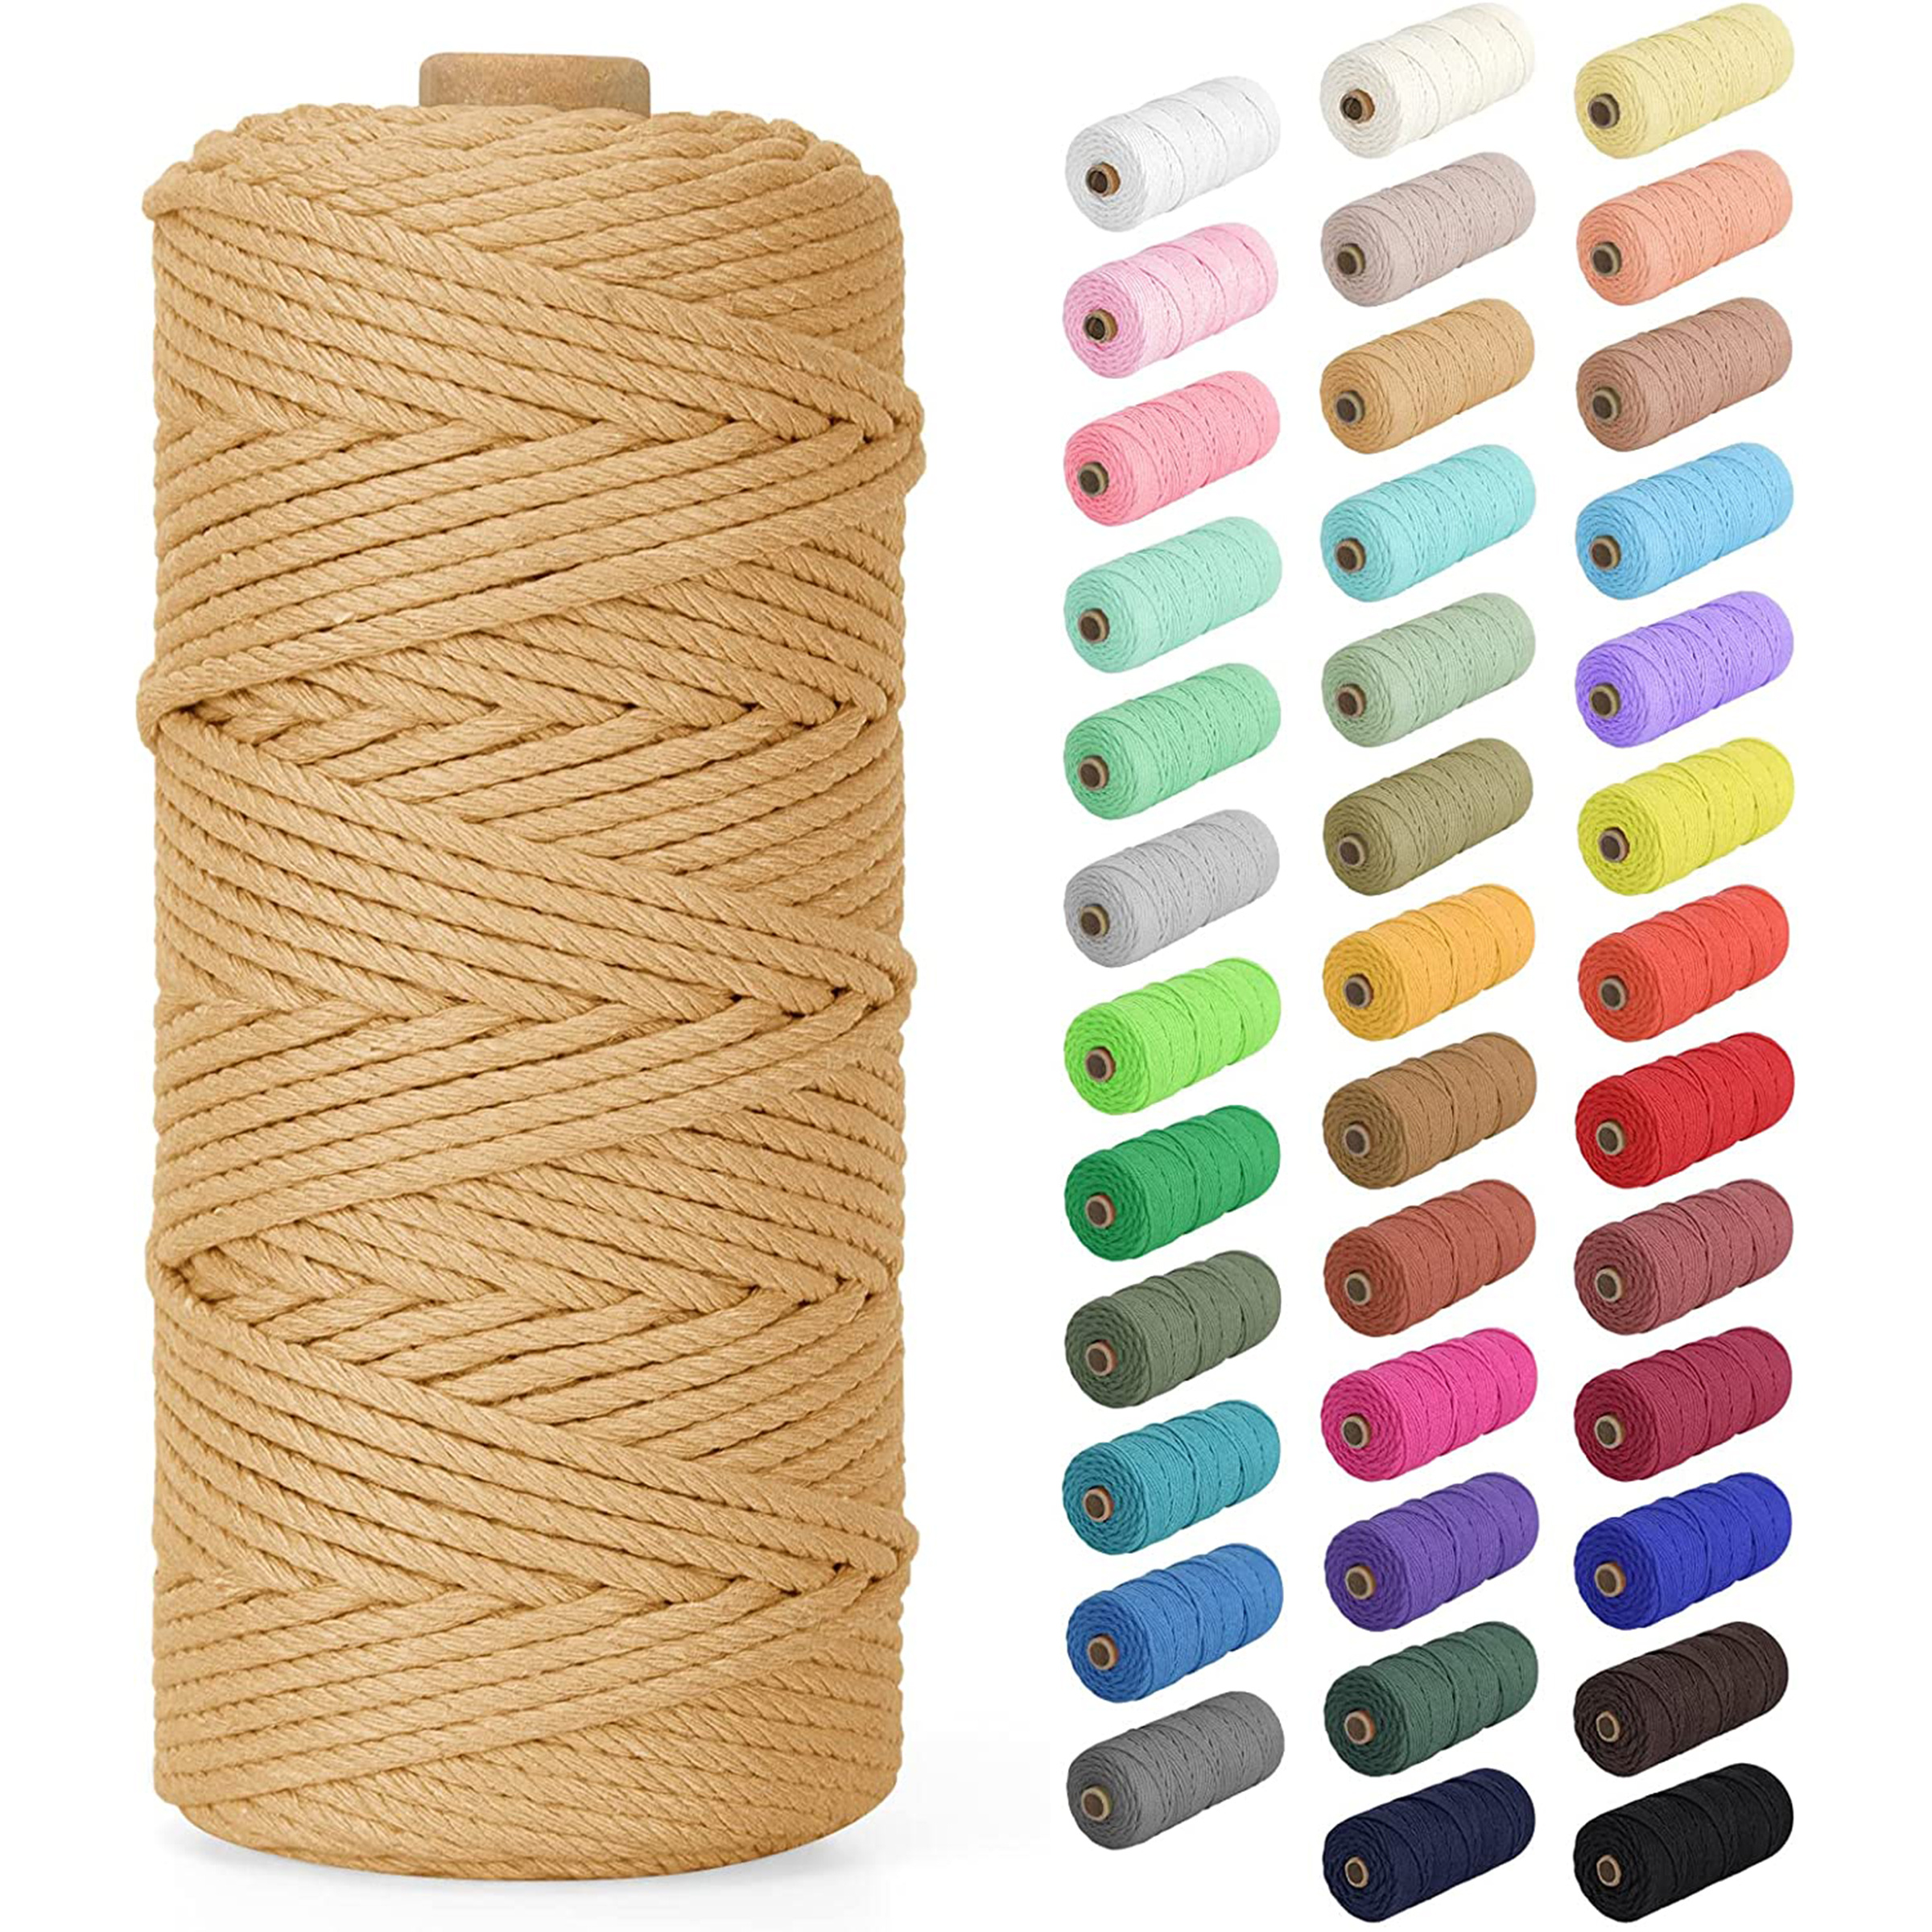 Natural Macrame Cord 2mm x 220yards, Colored Rope, Cotton Rope Yarn, Colorful Cotton Craft Cord for Wall Hanging, Plant Hangers, Crafts, Knitting